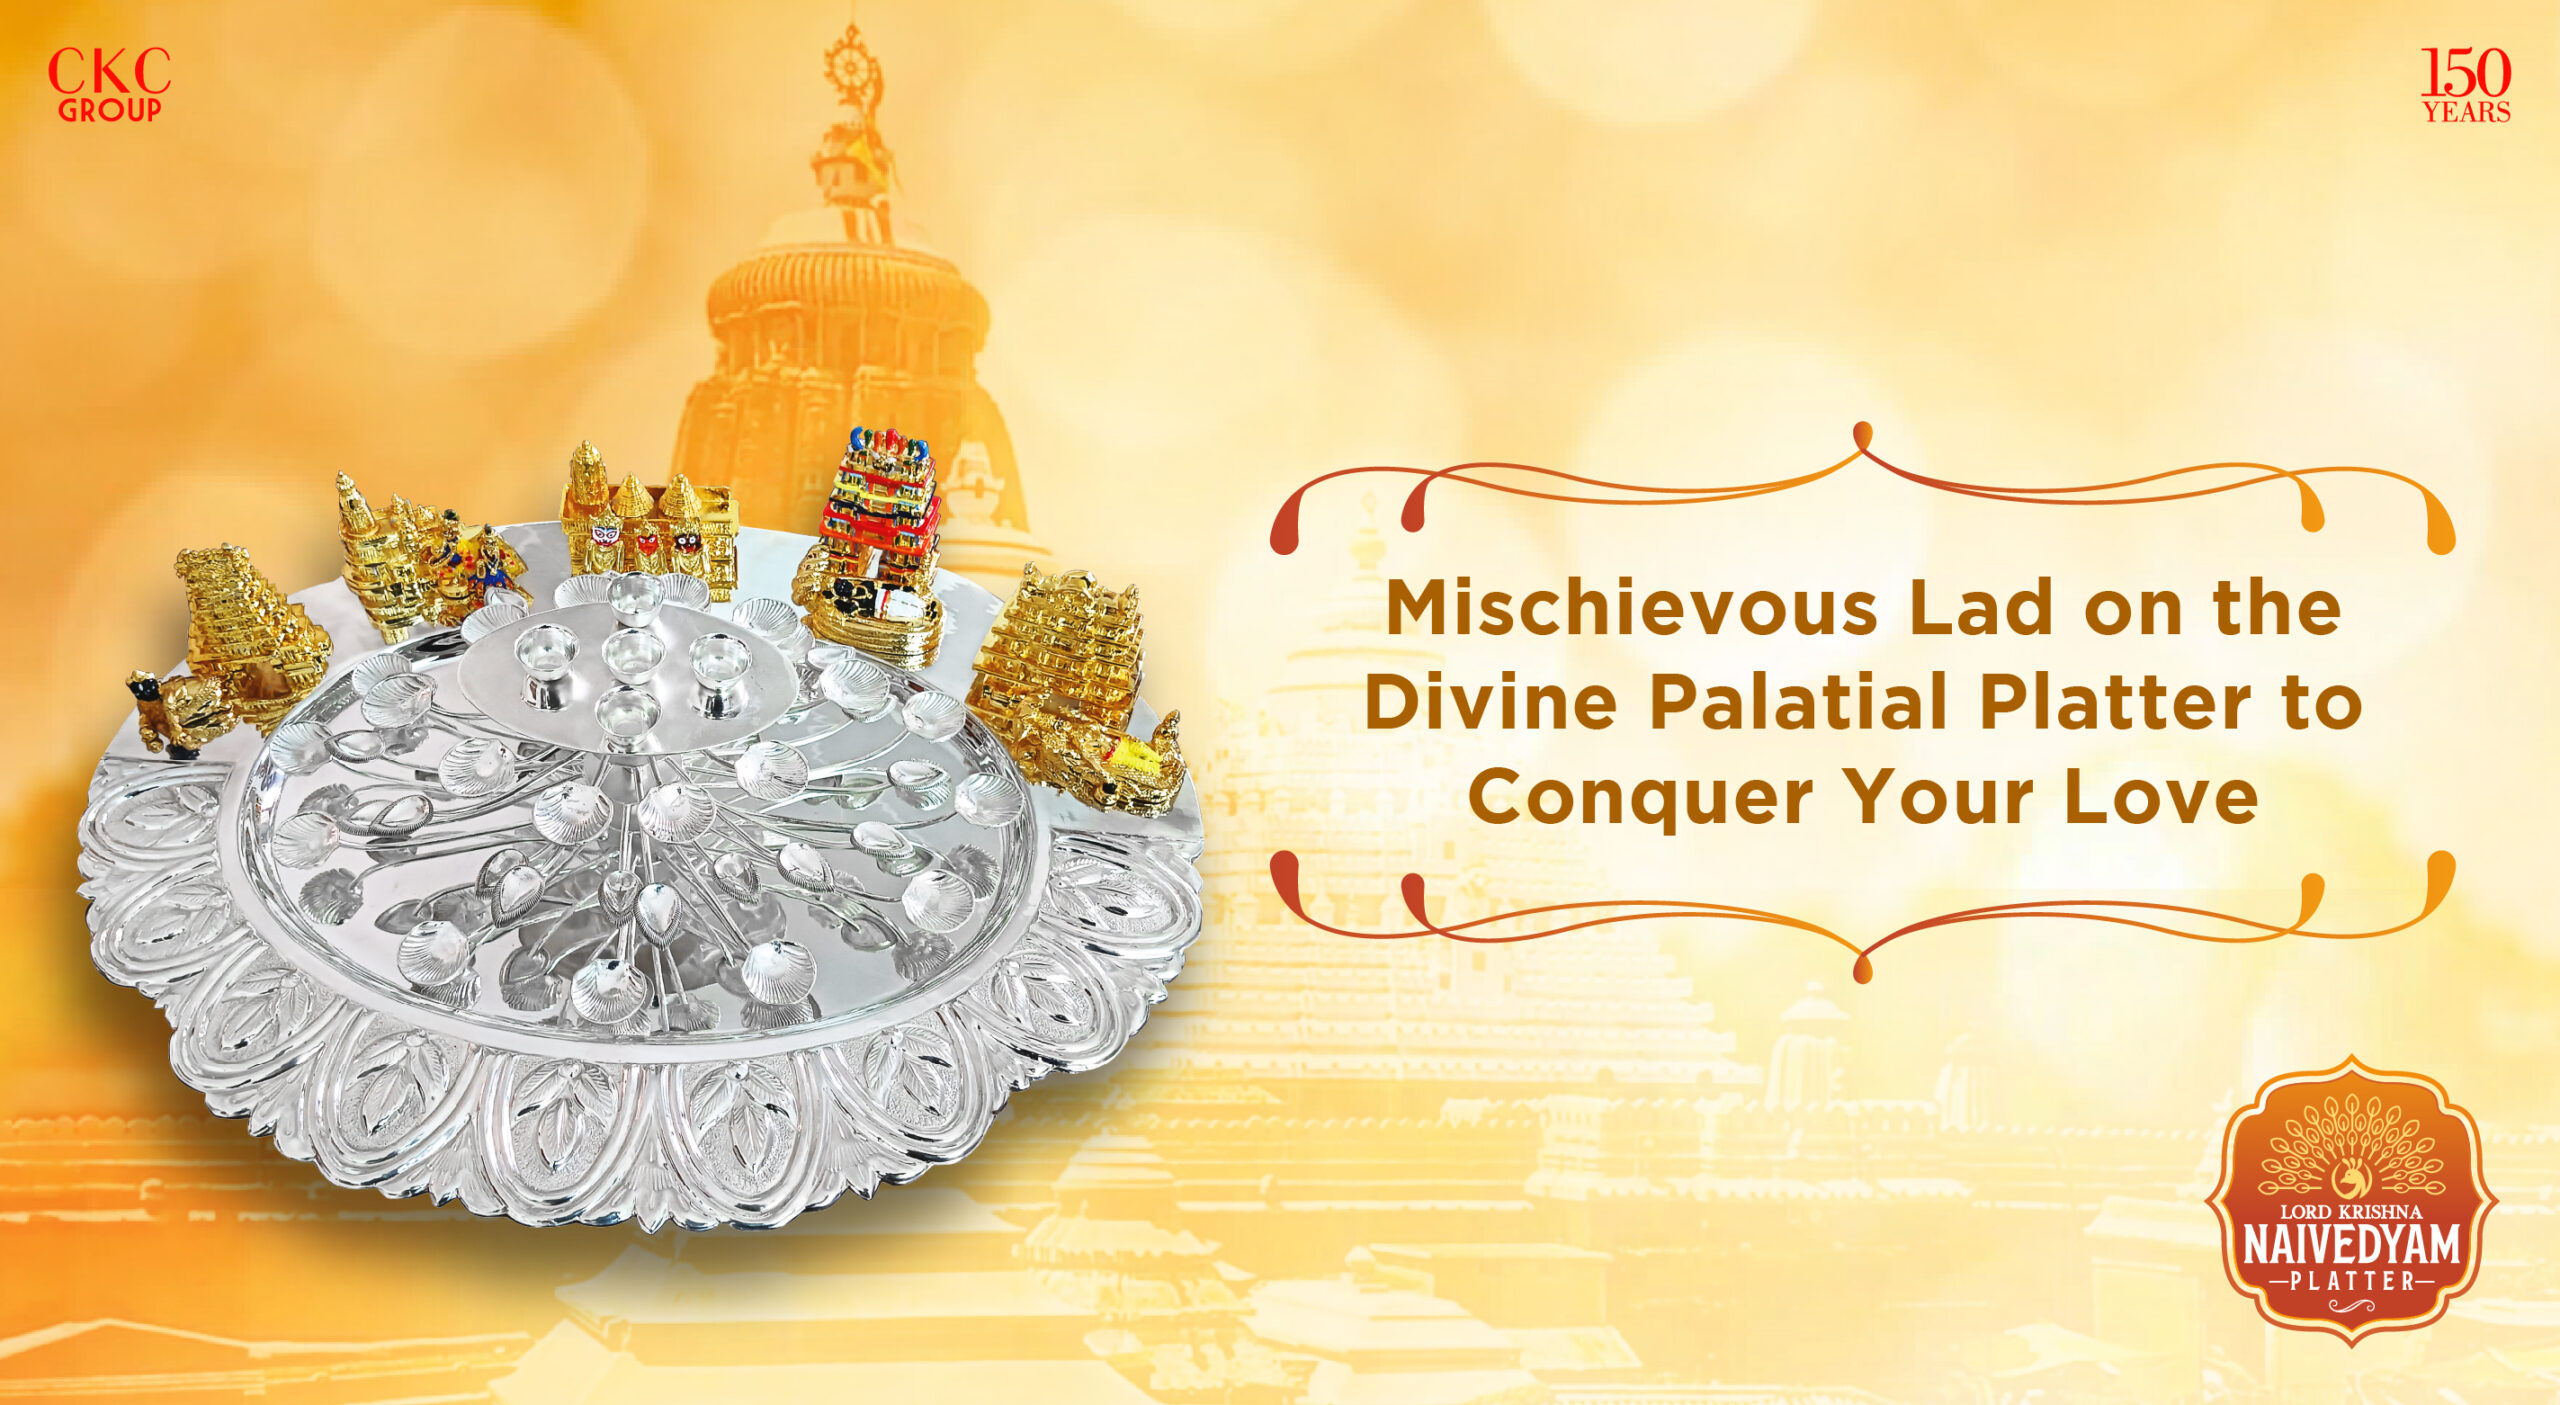 Mischievous Lad on the Divine Palatial Platter to Conquer Your Love